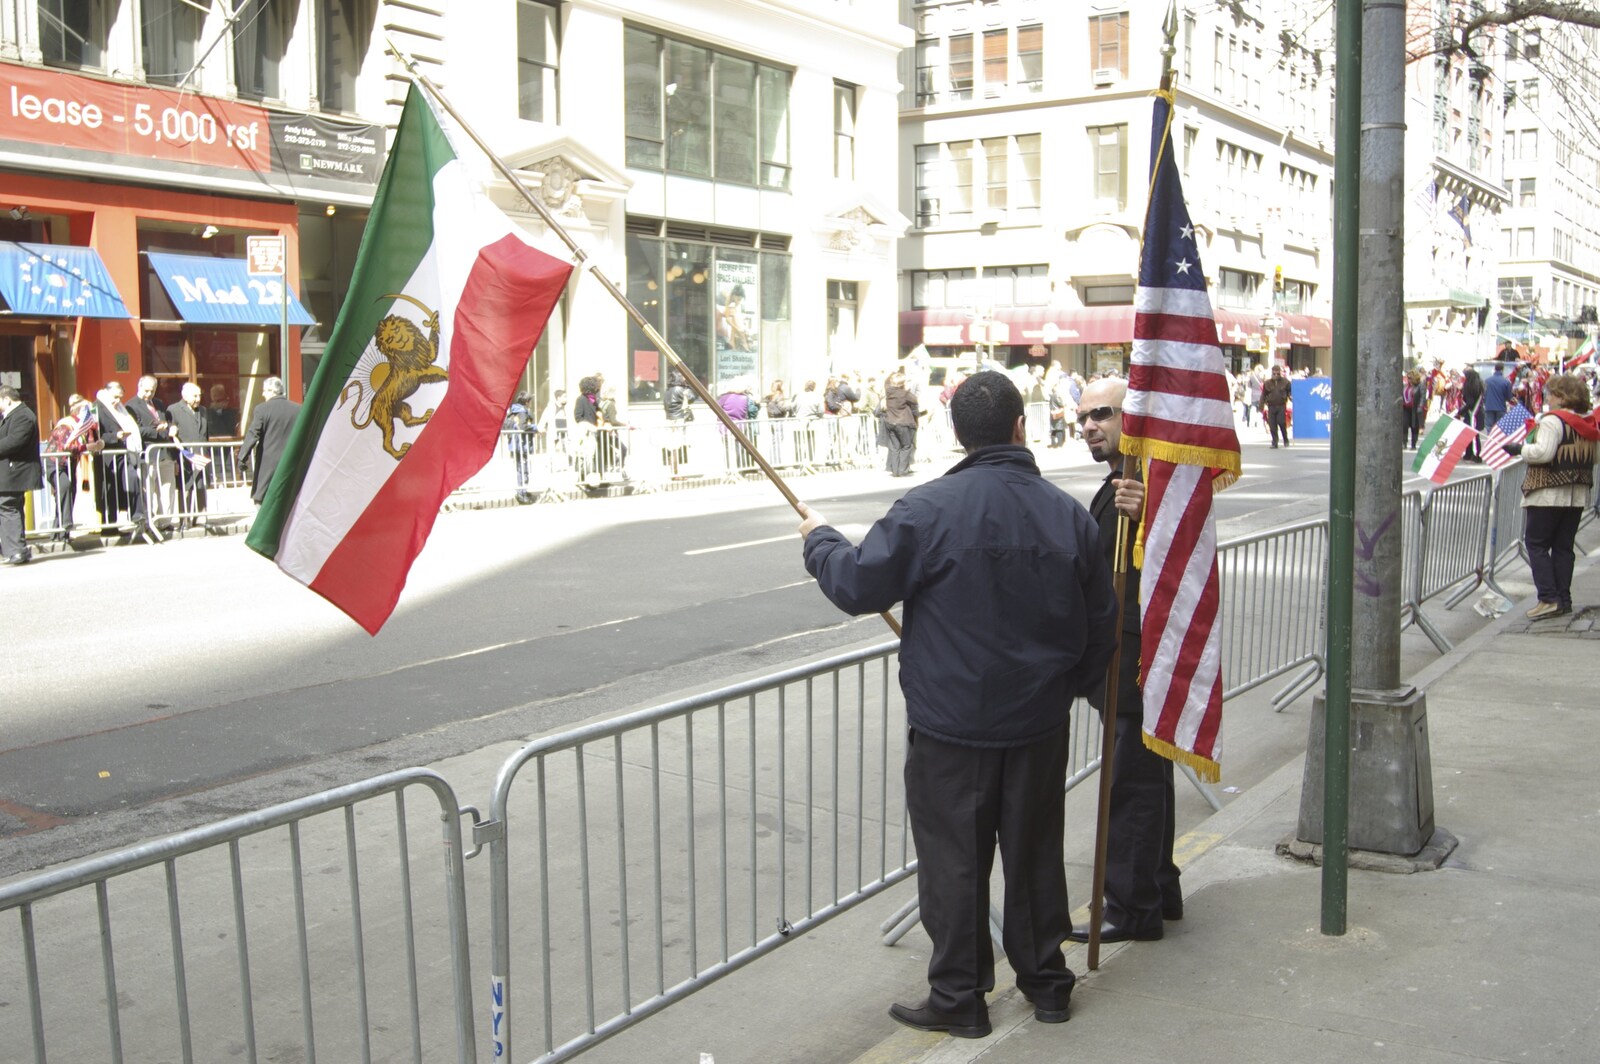 Persian Day Parade, Upper East Side and Midtown, New York, US - 25th March 2007: Flags are waved